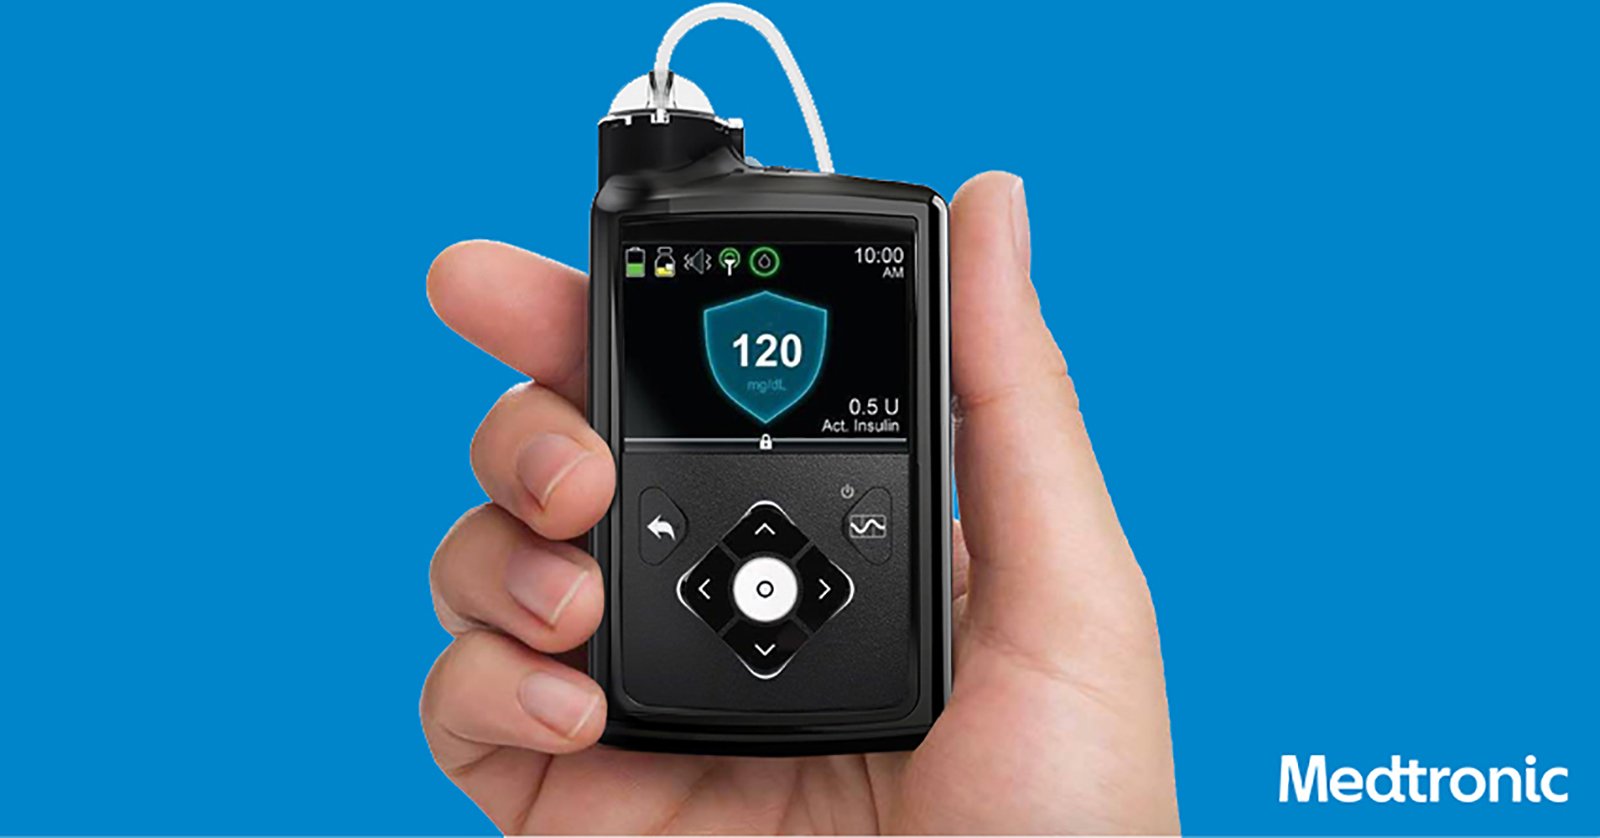 Medtronic Recalls Certain MiniMed Insulin Pumps Tied to 1 Death